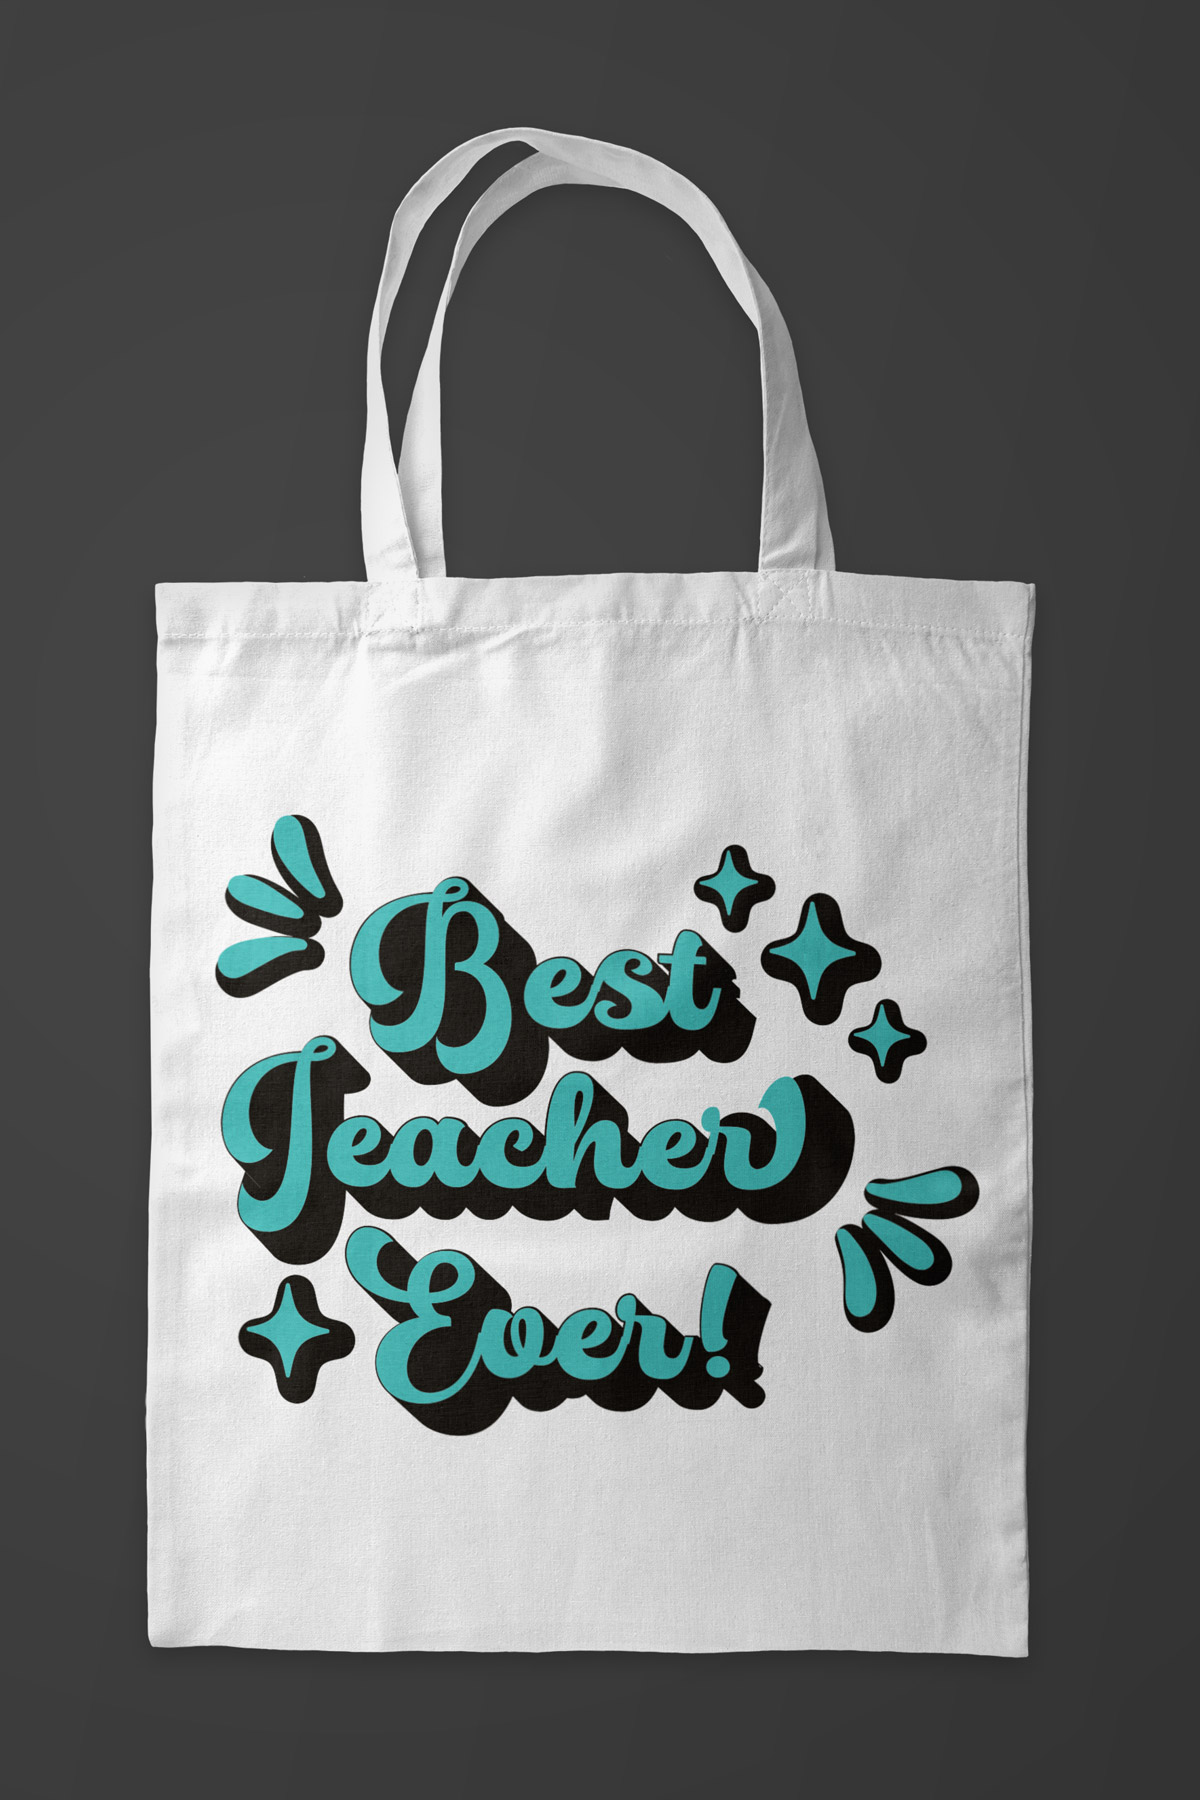 This image shows a tote bag using the best teacher svg free files from this post. It says best teacher ever.